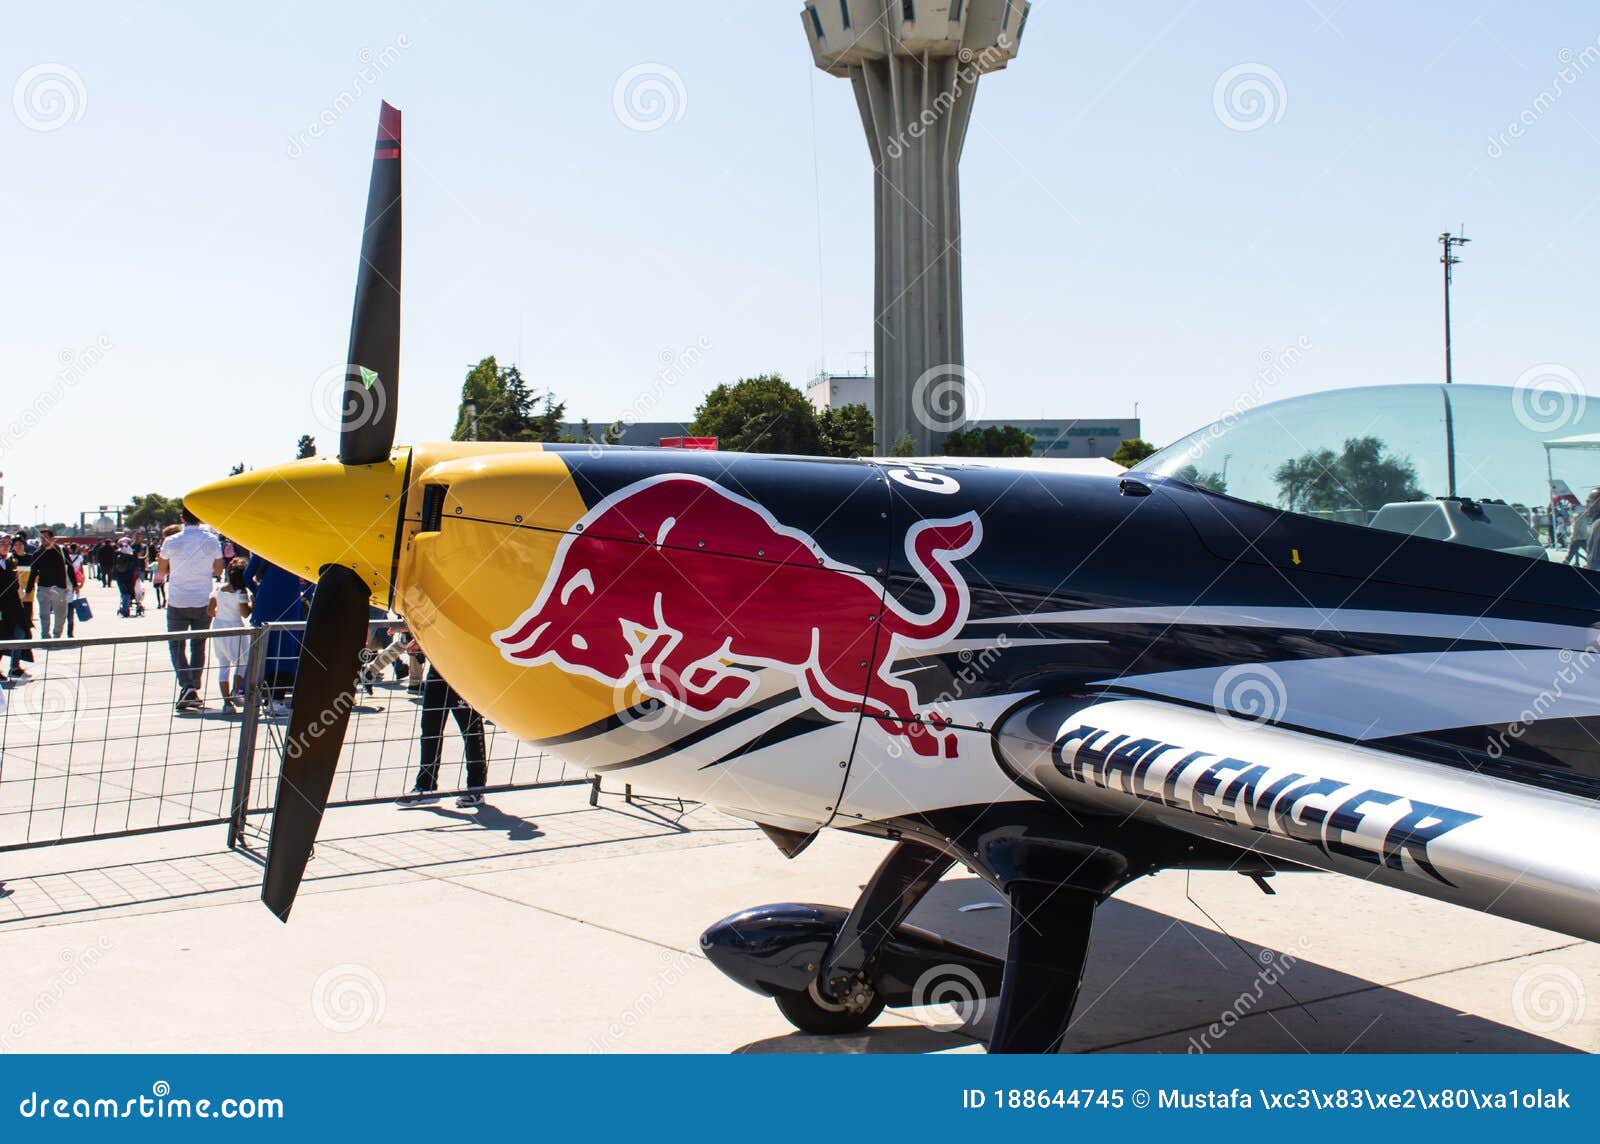 Redbull Airplane. Red Bull Air Race World Series is Airplane Sponsored by Red Editorial Image - Image of airline, ship: 188644745